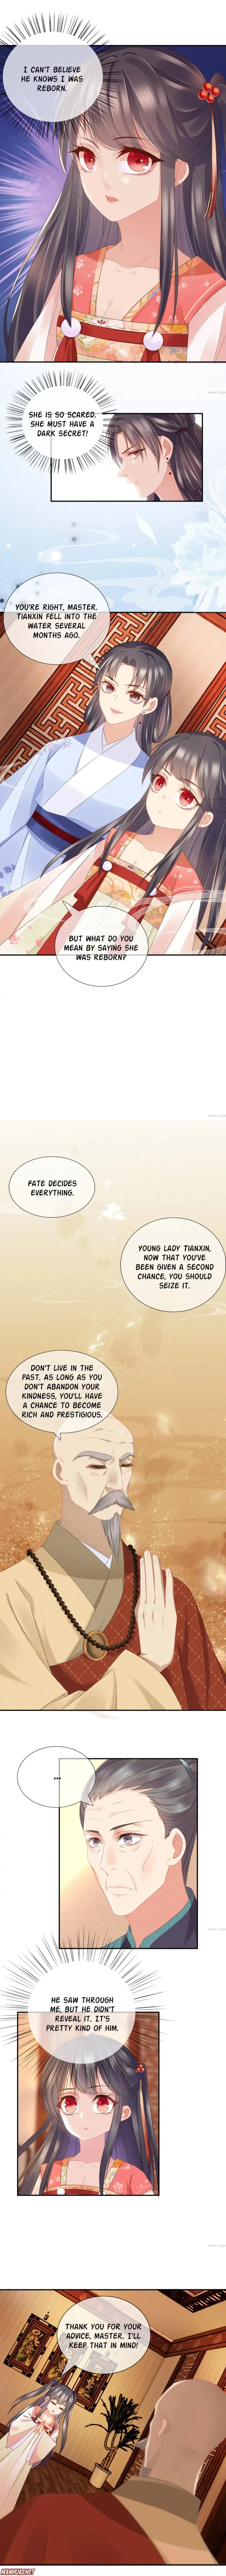 Have Mercy, Your Ladyship! - Page 2